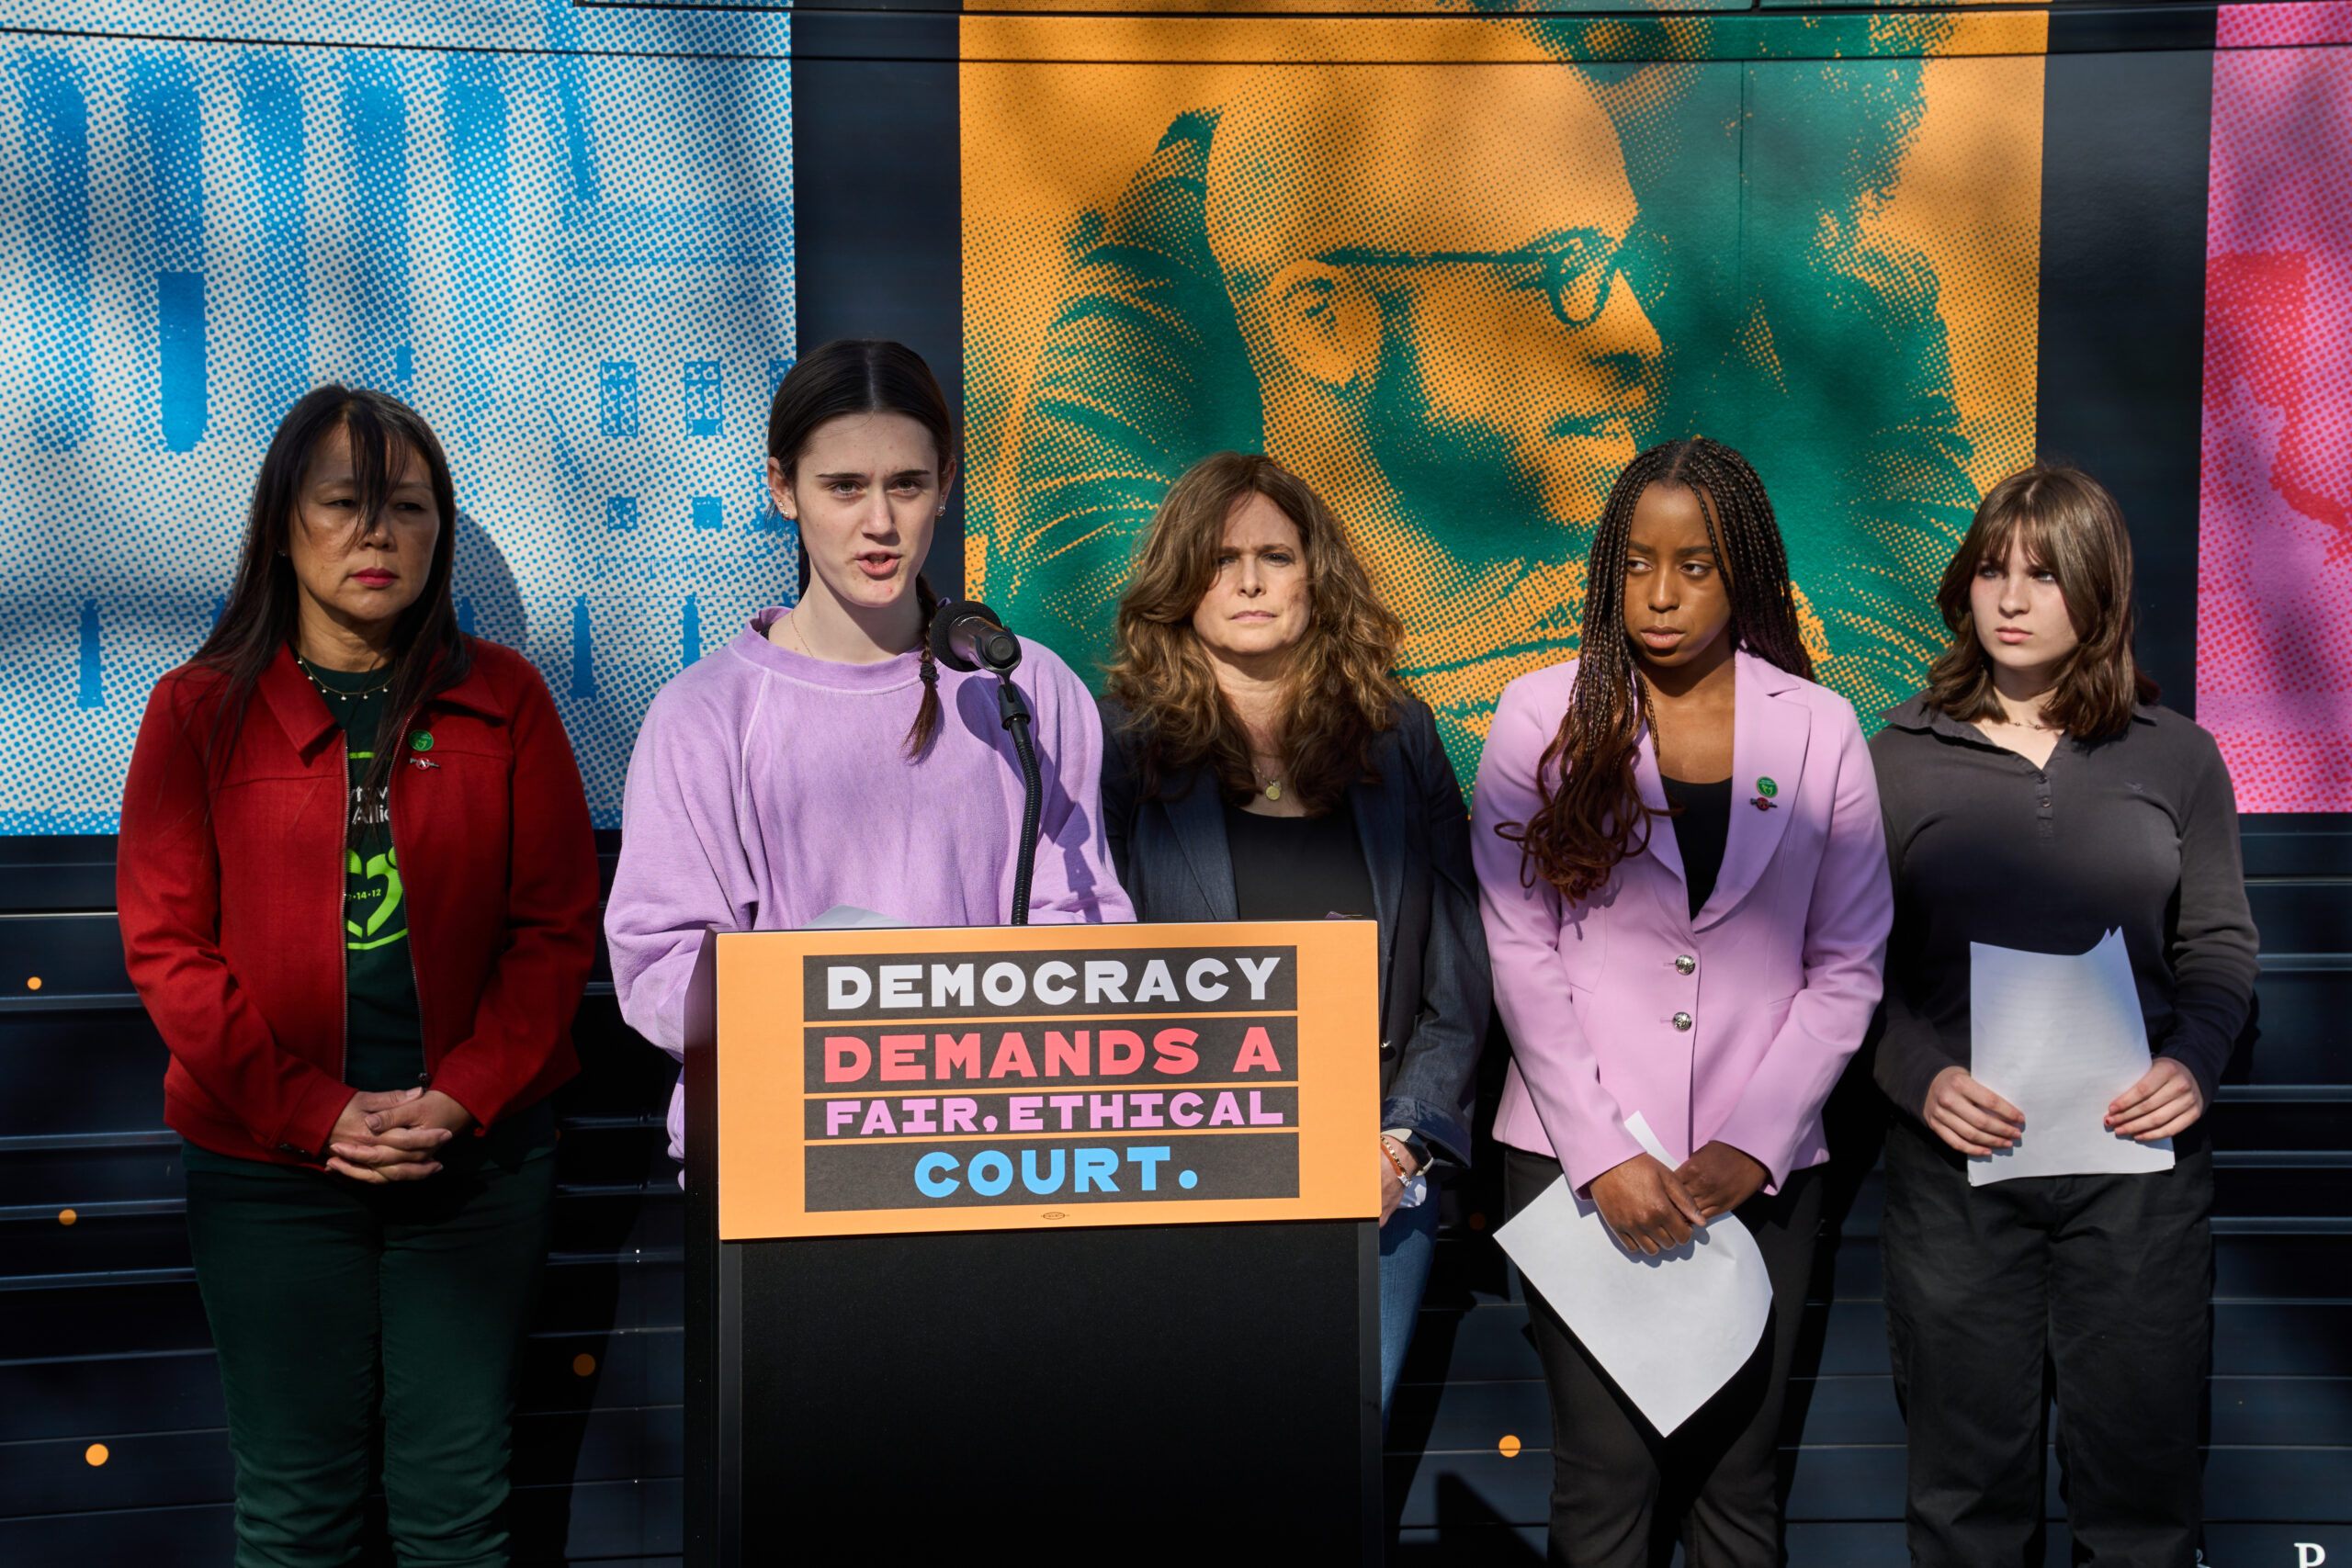 image of sandy hook survivors speaking behind a podium at a press event